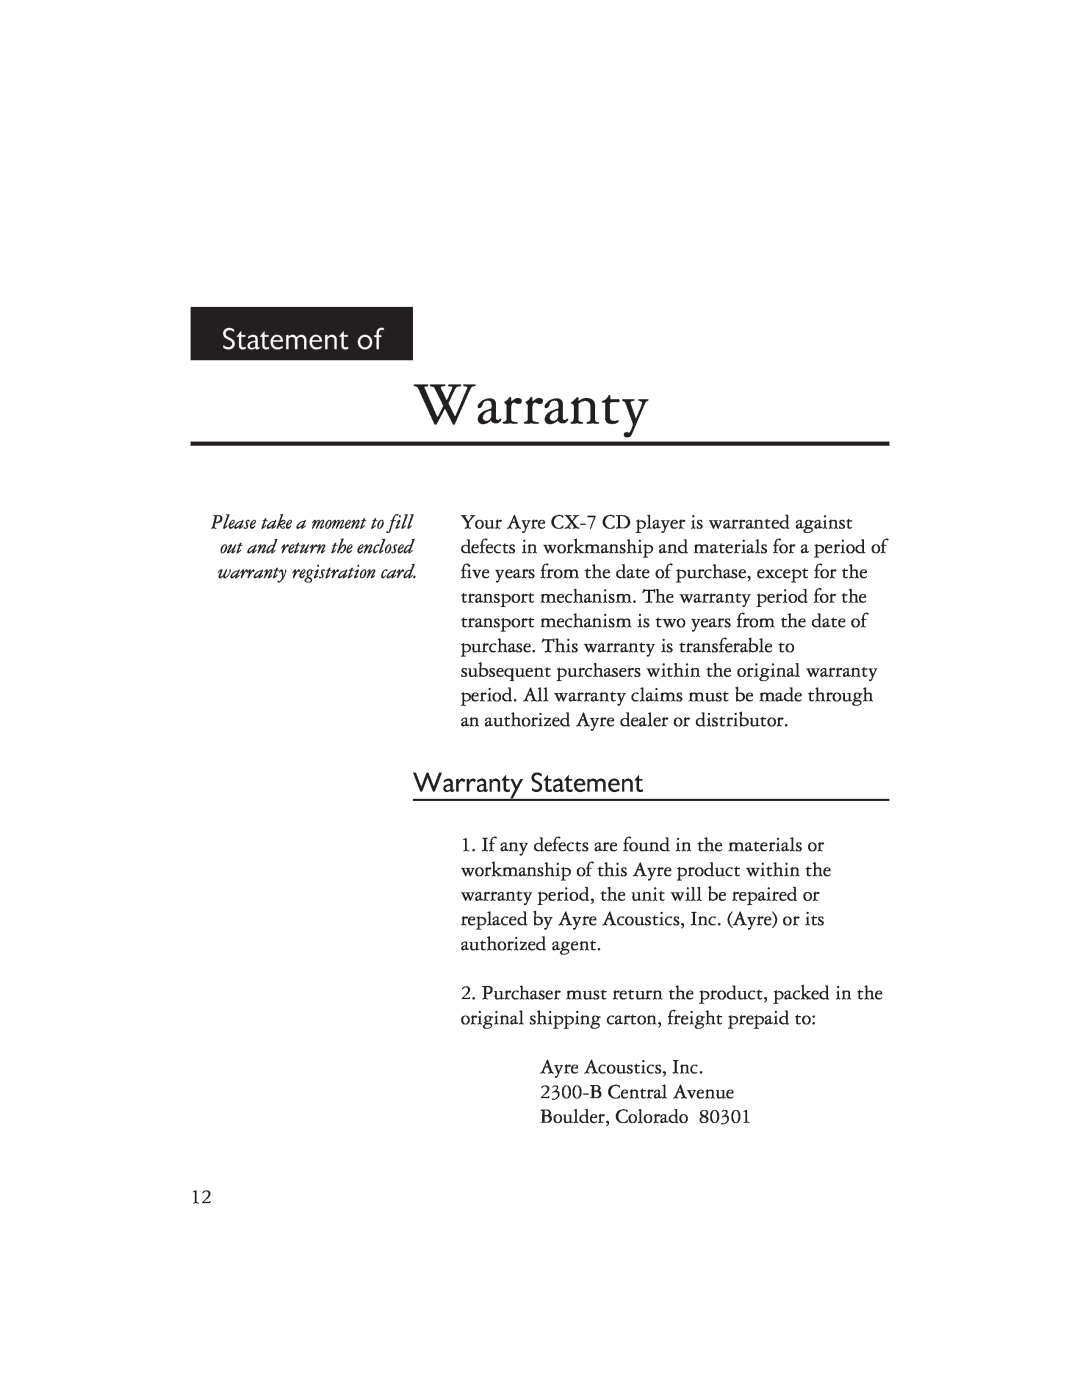 Ayre Acoustics CX-7 owner manual Statement of, Warranty Statement 